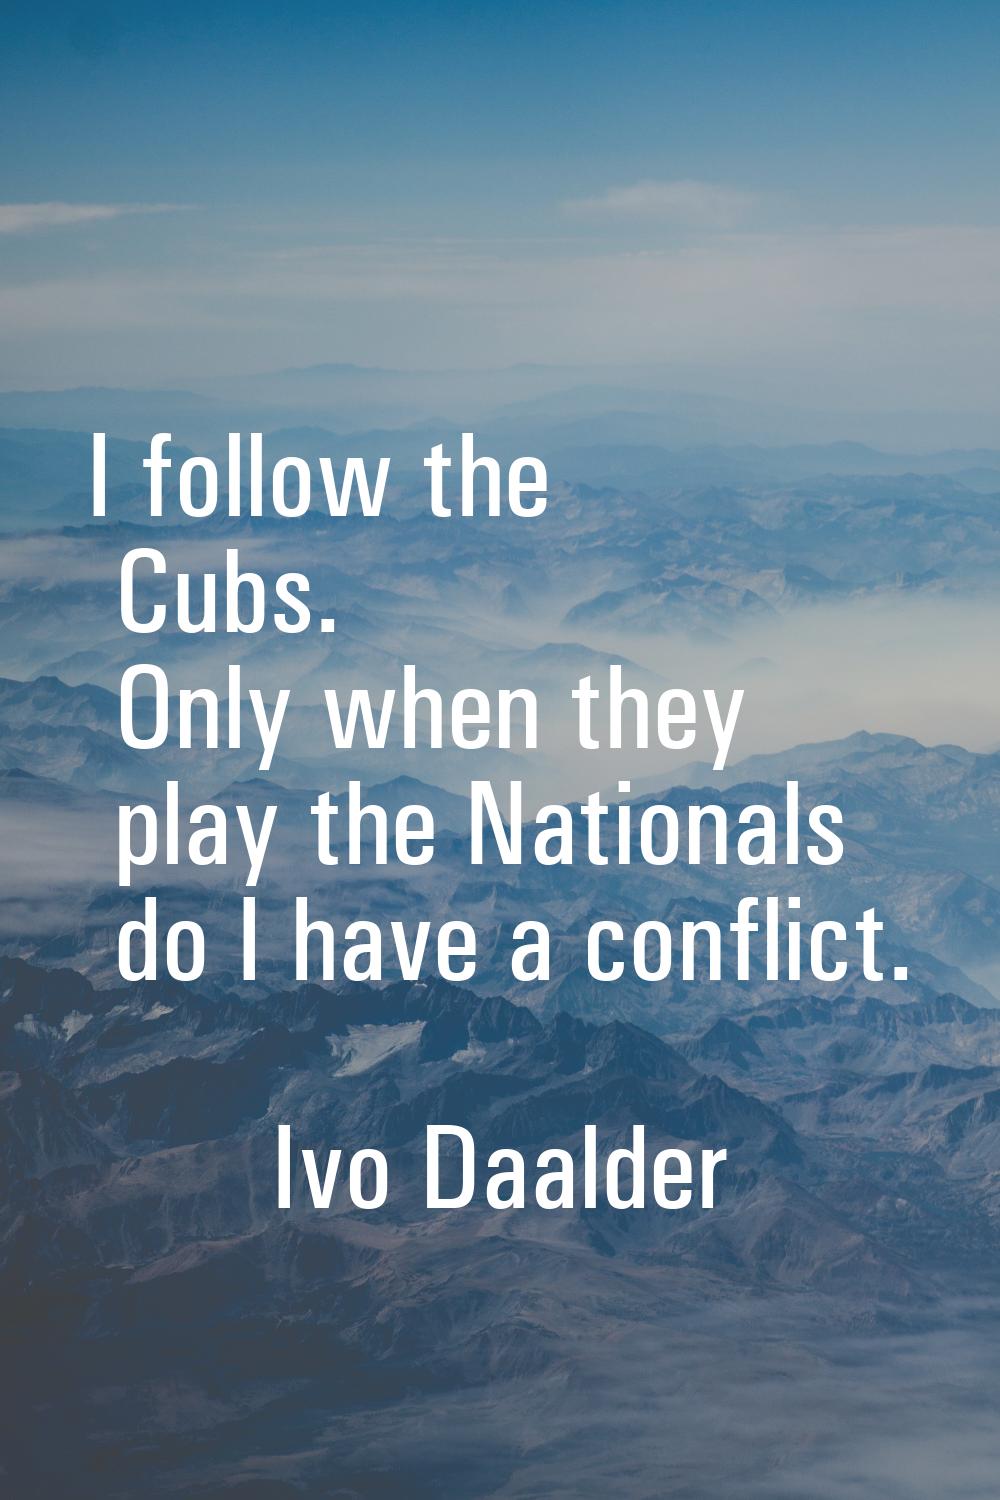 I follow the Cubs. Only when they play the Nationals do I have a conflict.